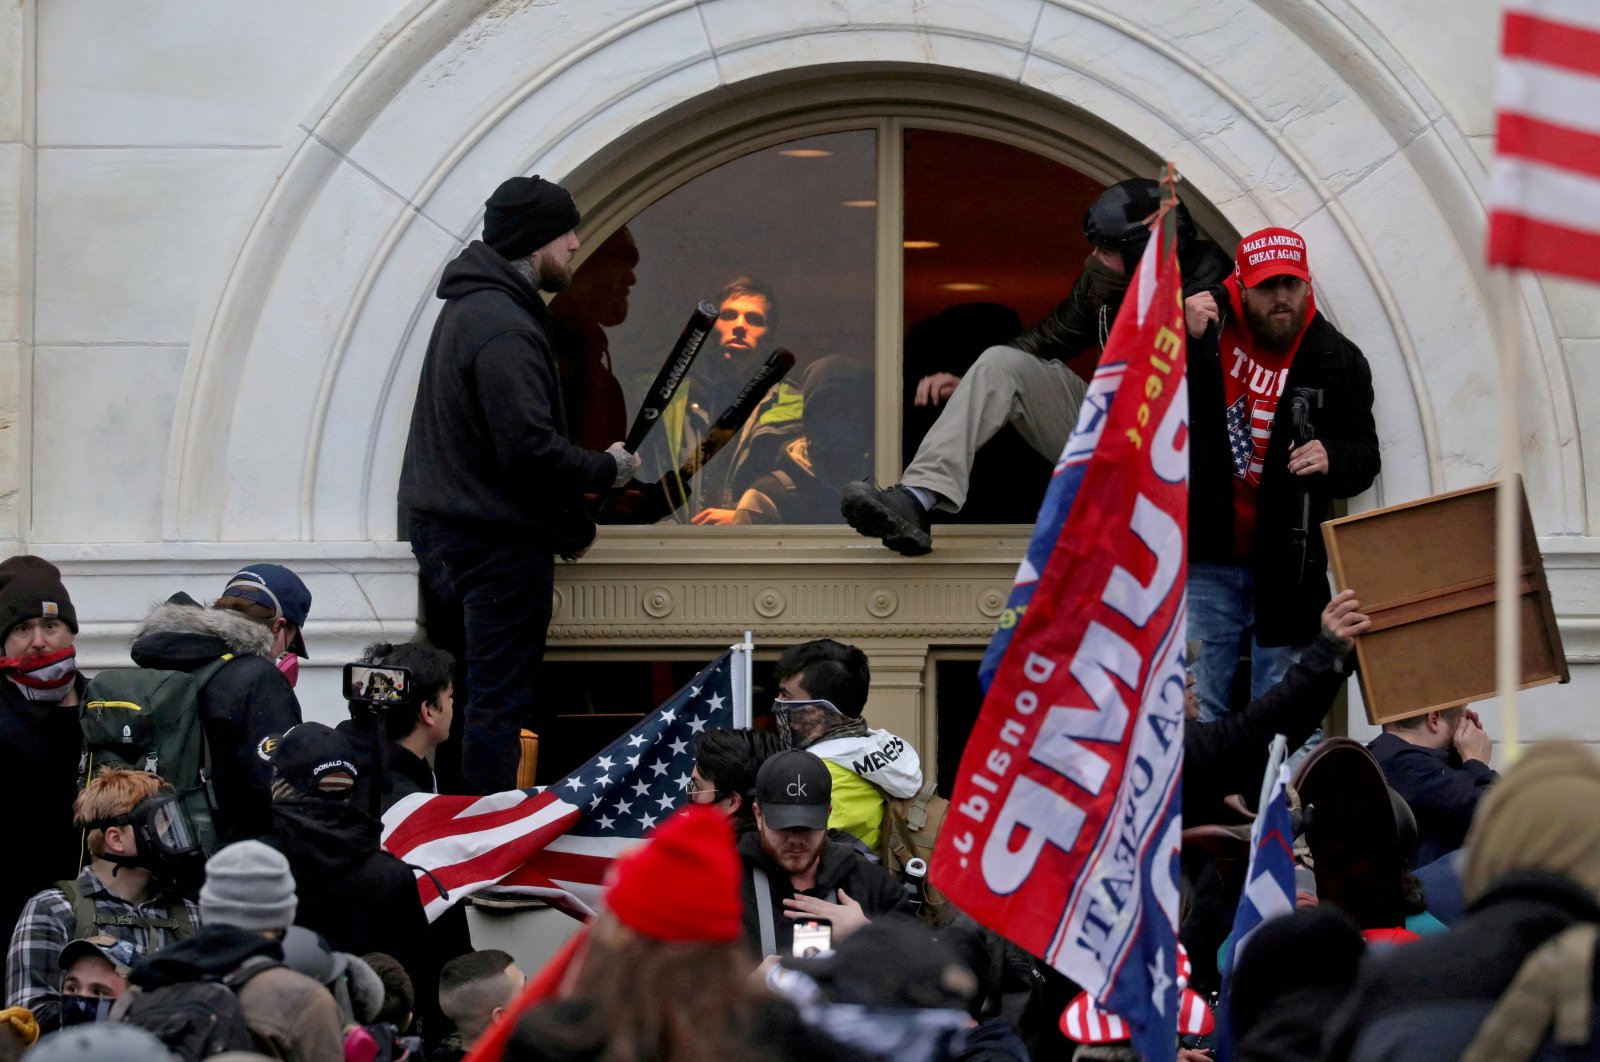 Supporters of then-U.S. President Donald Trump climb through a window they broke as they storm the U.S. Capitol Building in Washington, D.C., U.S., Jan. 6, 2021. (Reuters Photo)